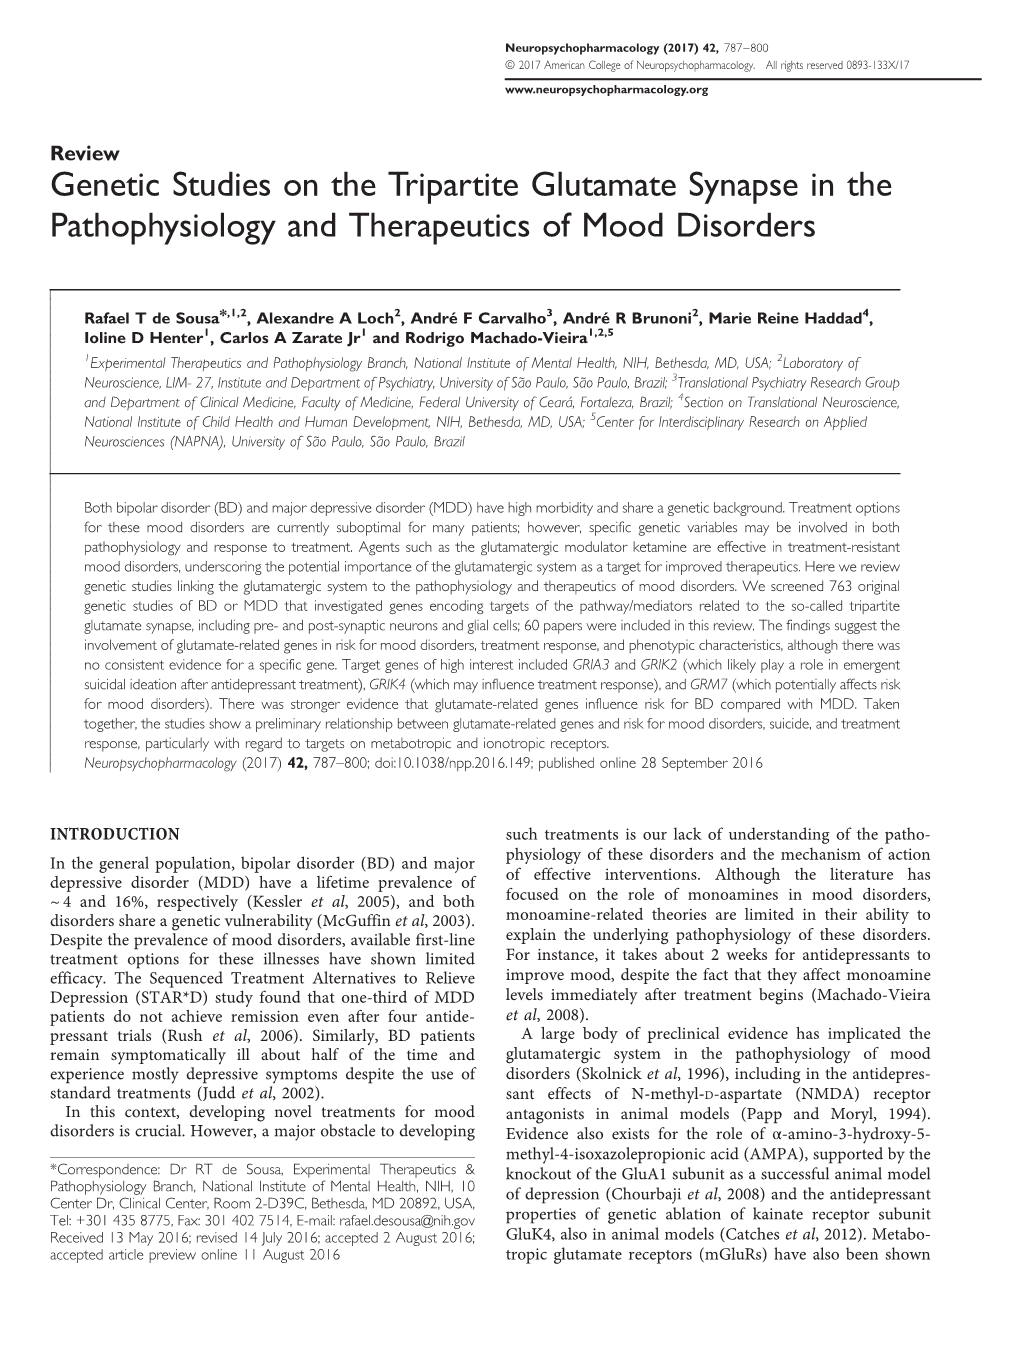 Genetic Studies on the Tripartite Glutamate Synapse in the Pathophysiology and Therapeutics of Mood Disorders